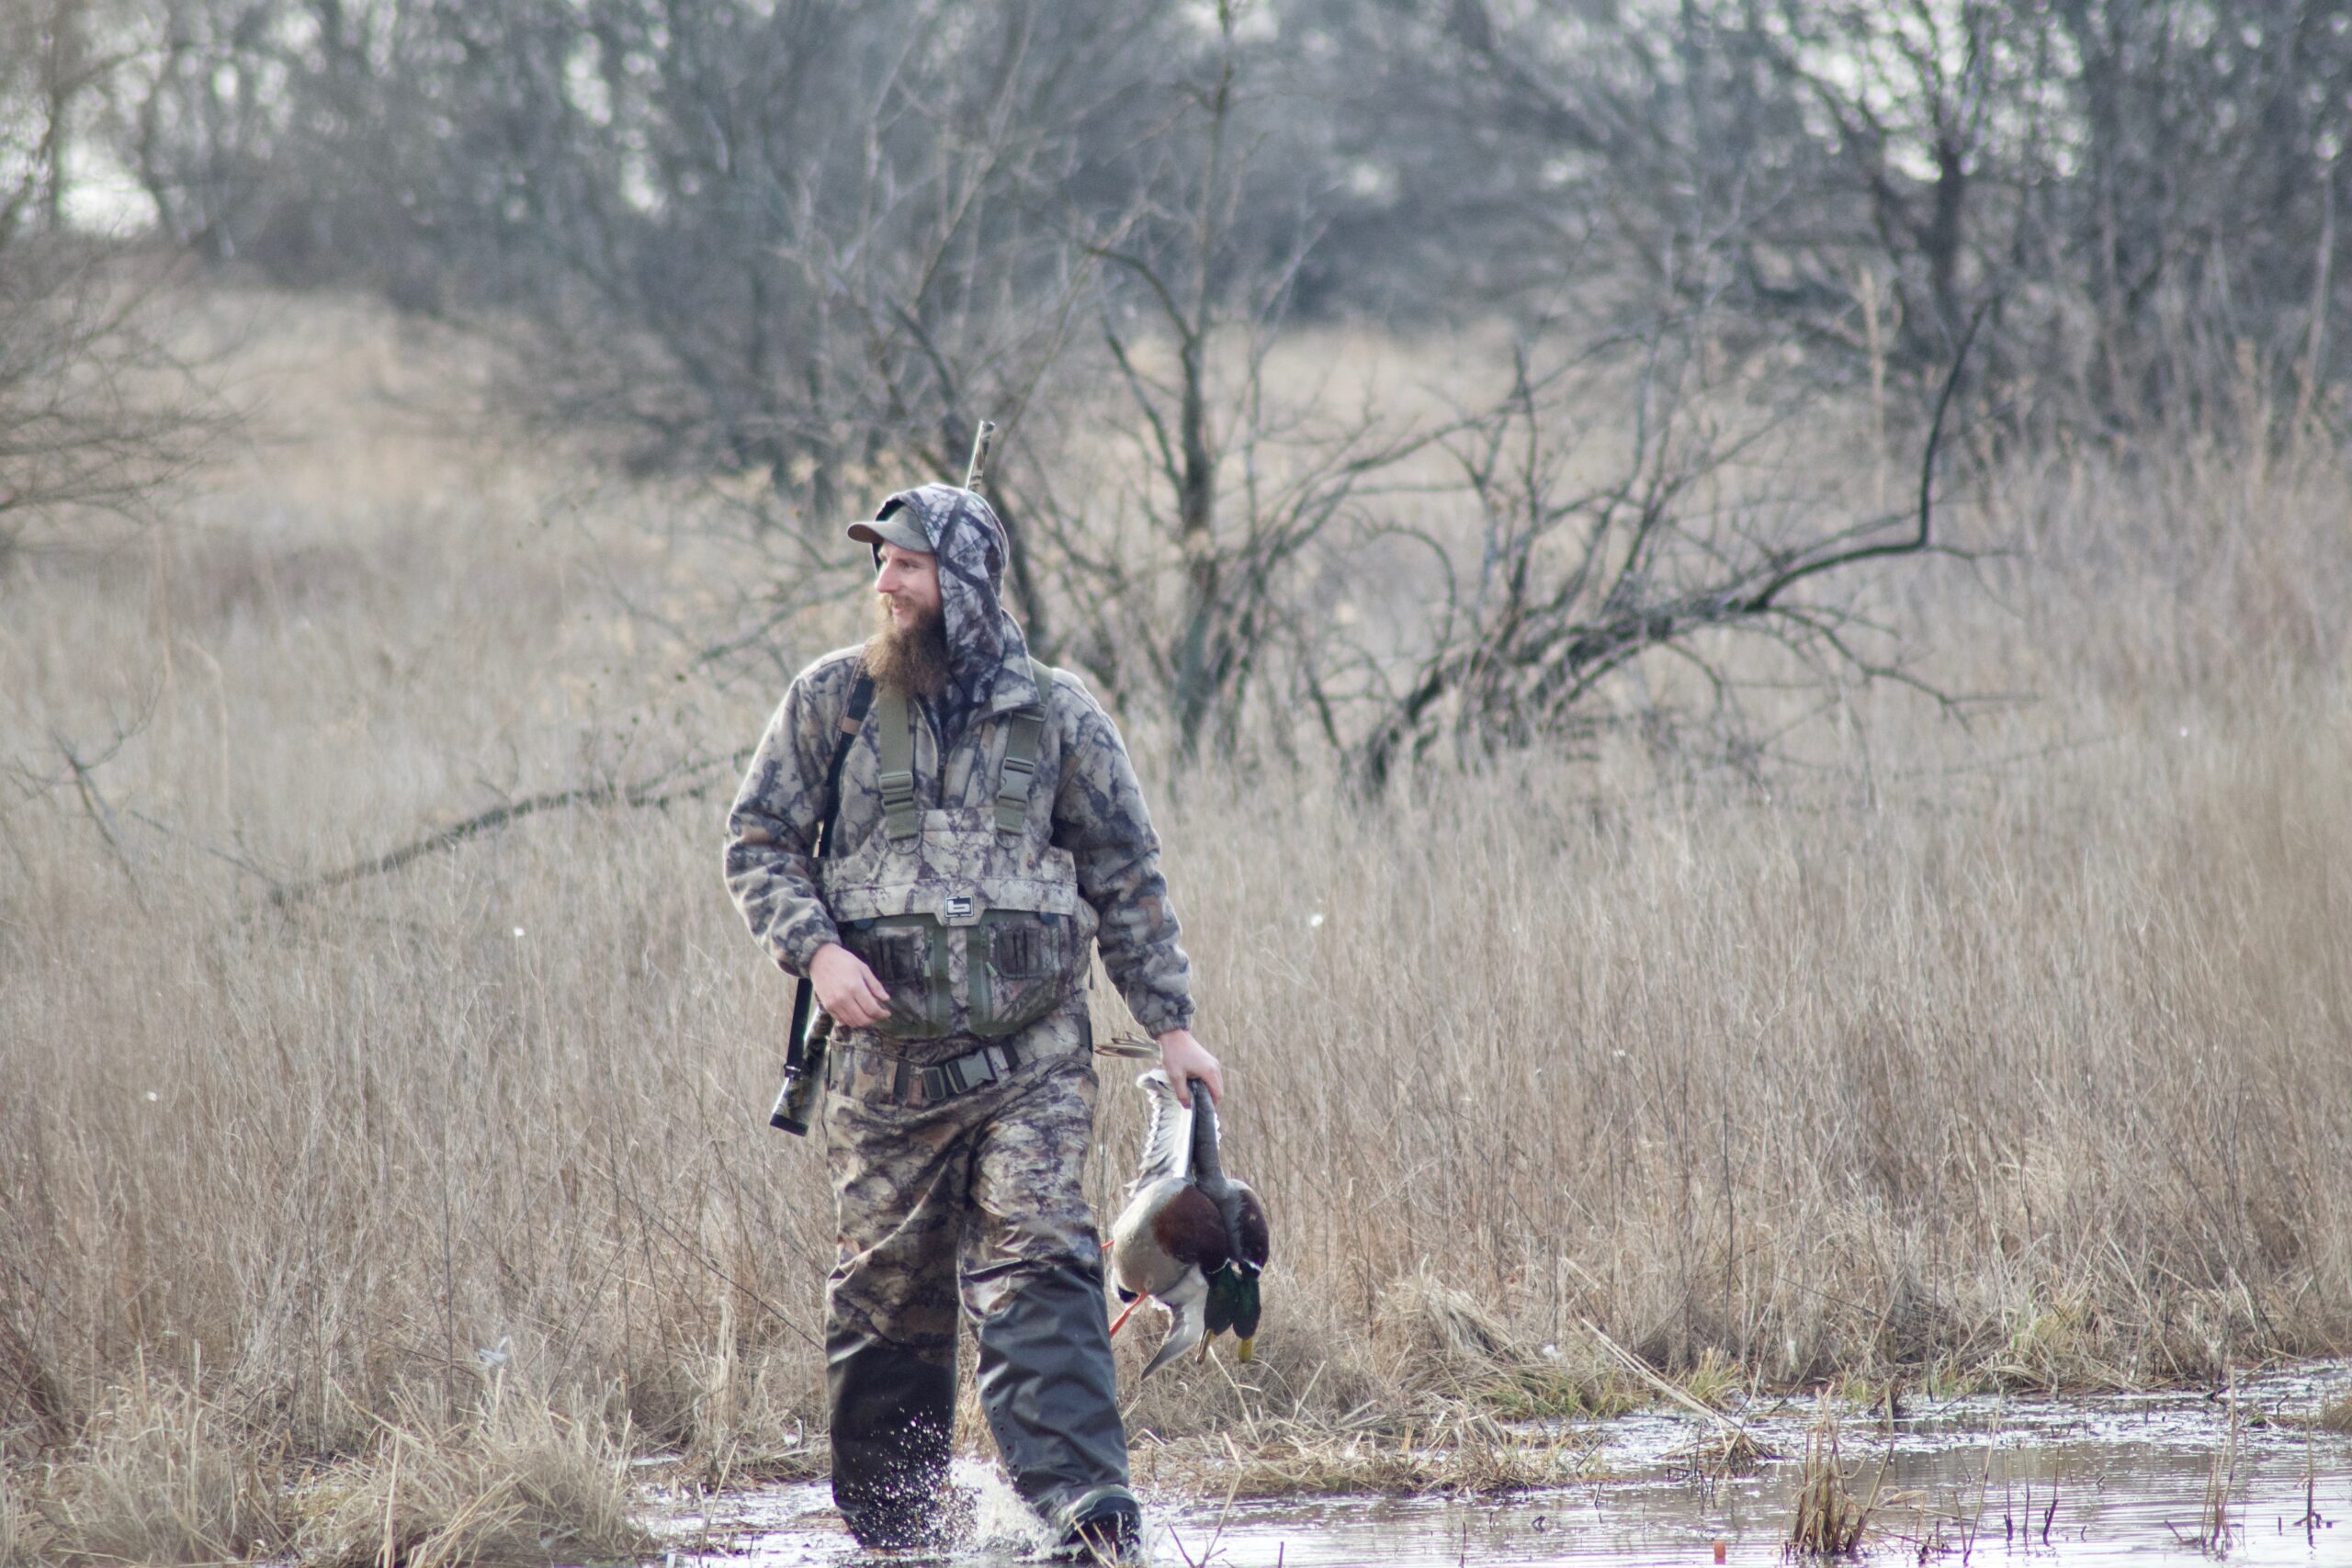 There's only one species of mallard no matter what continent you shoot one on.